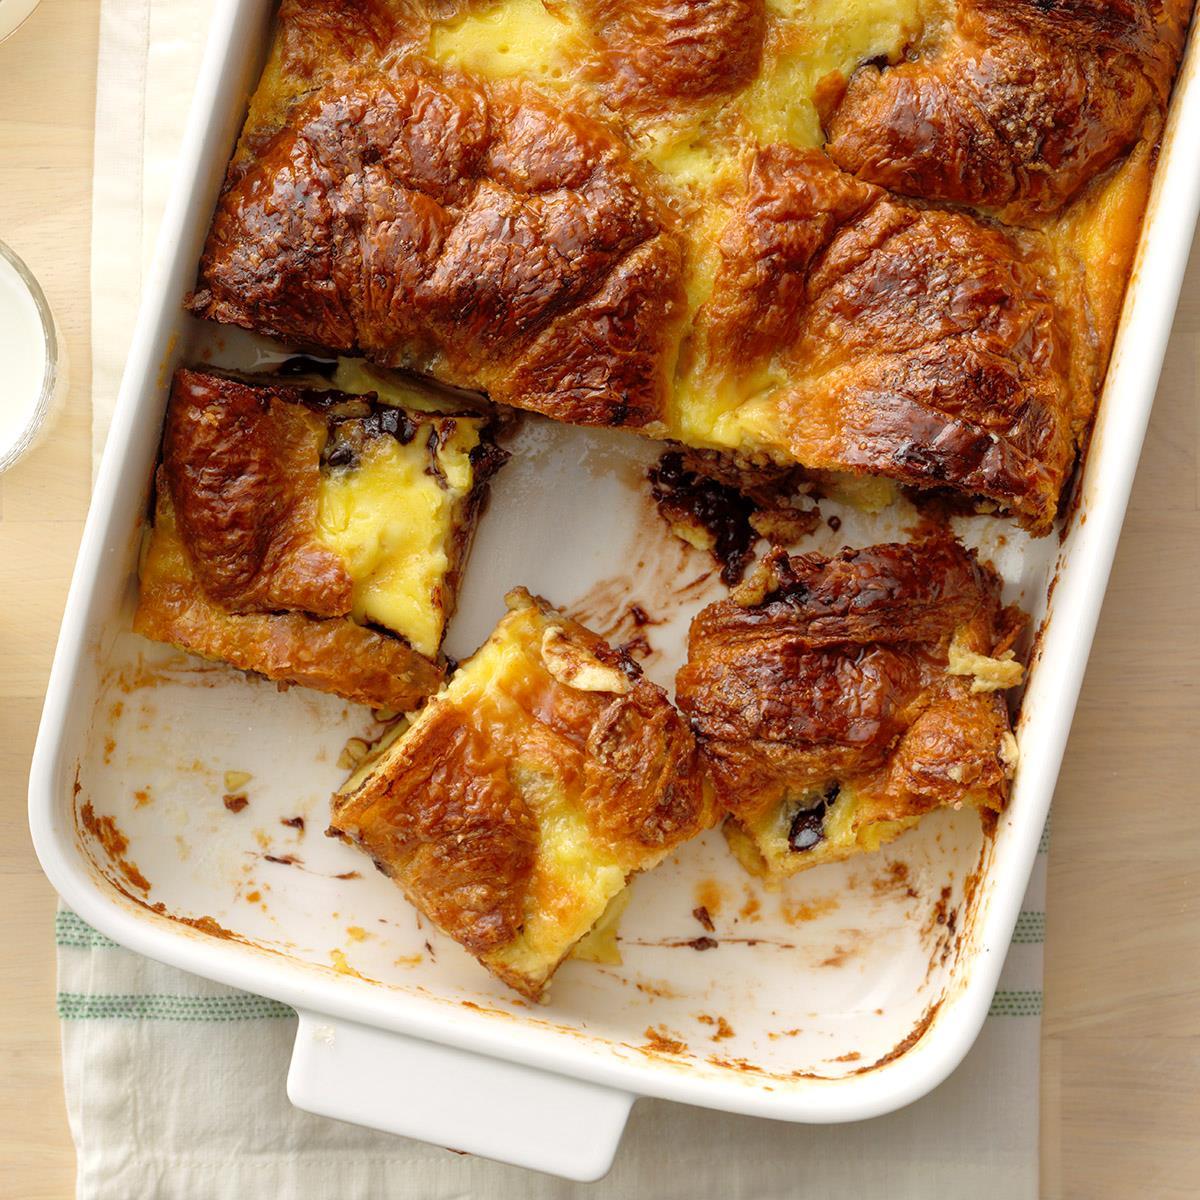 Chocolate Croissant Pudding Recipe How To Make It